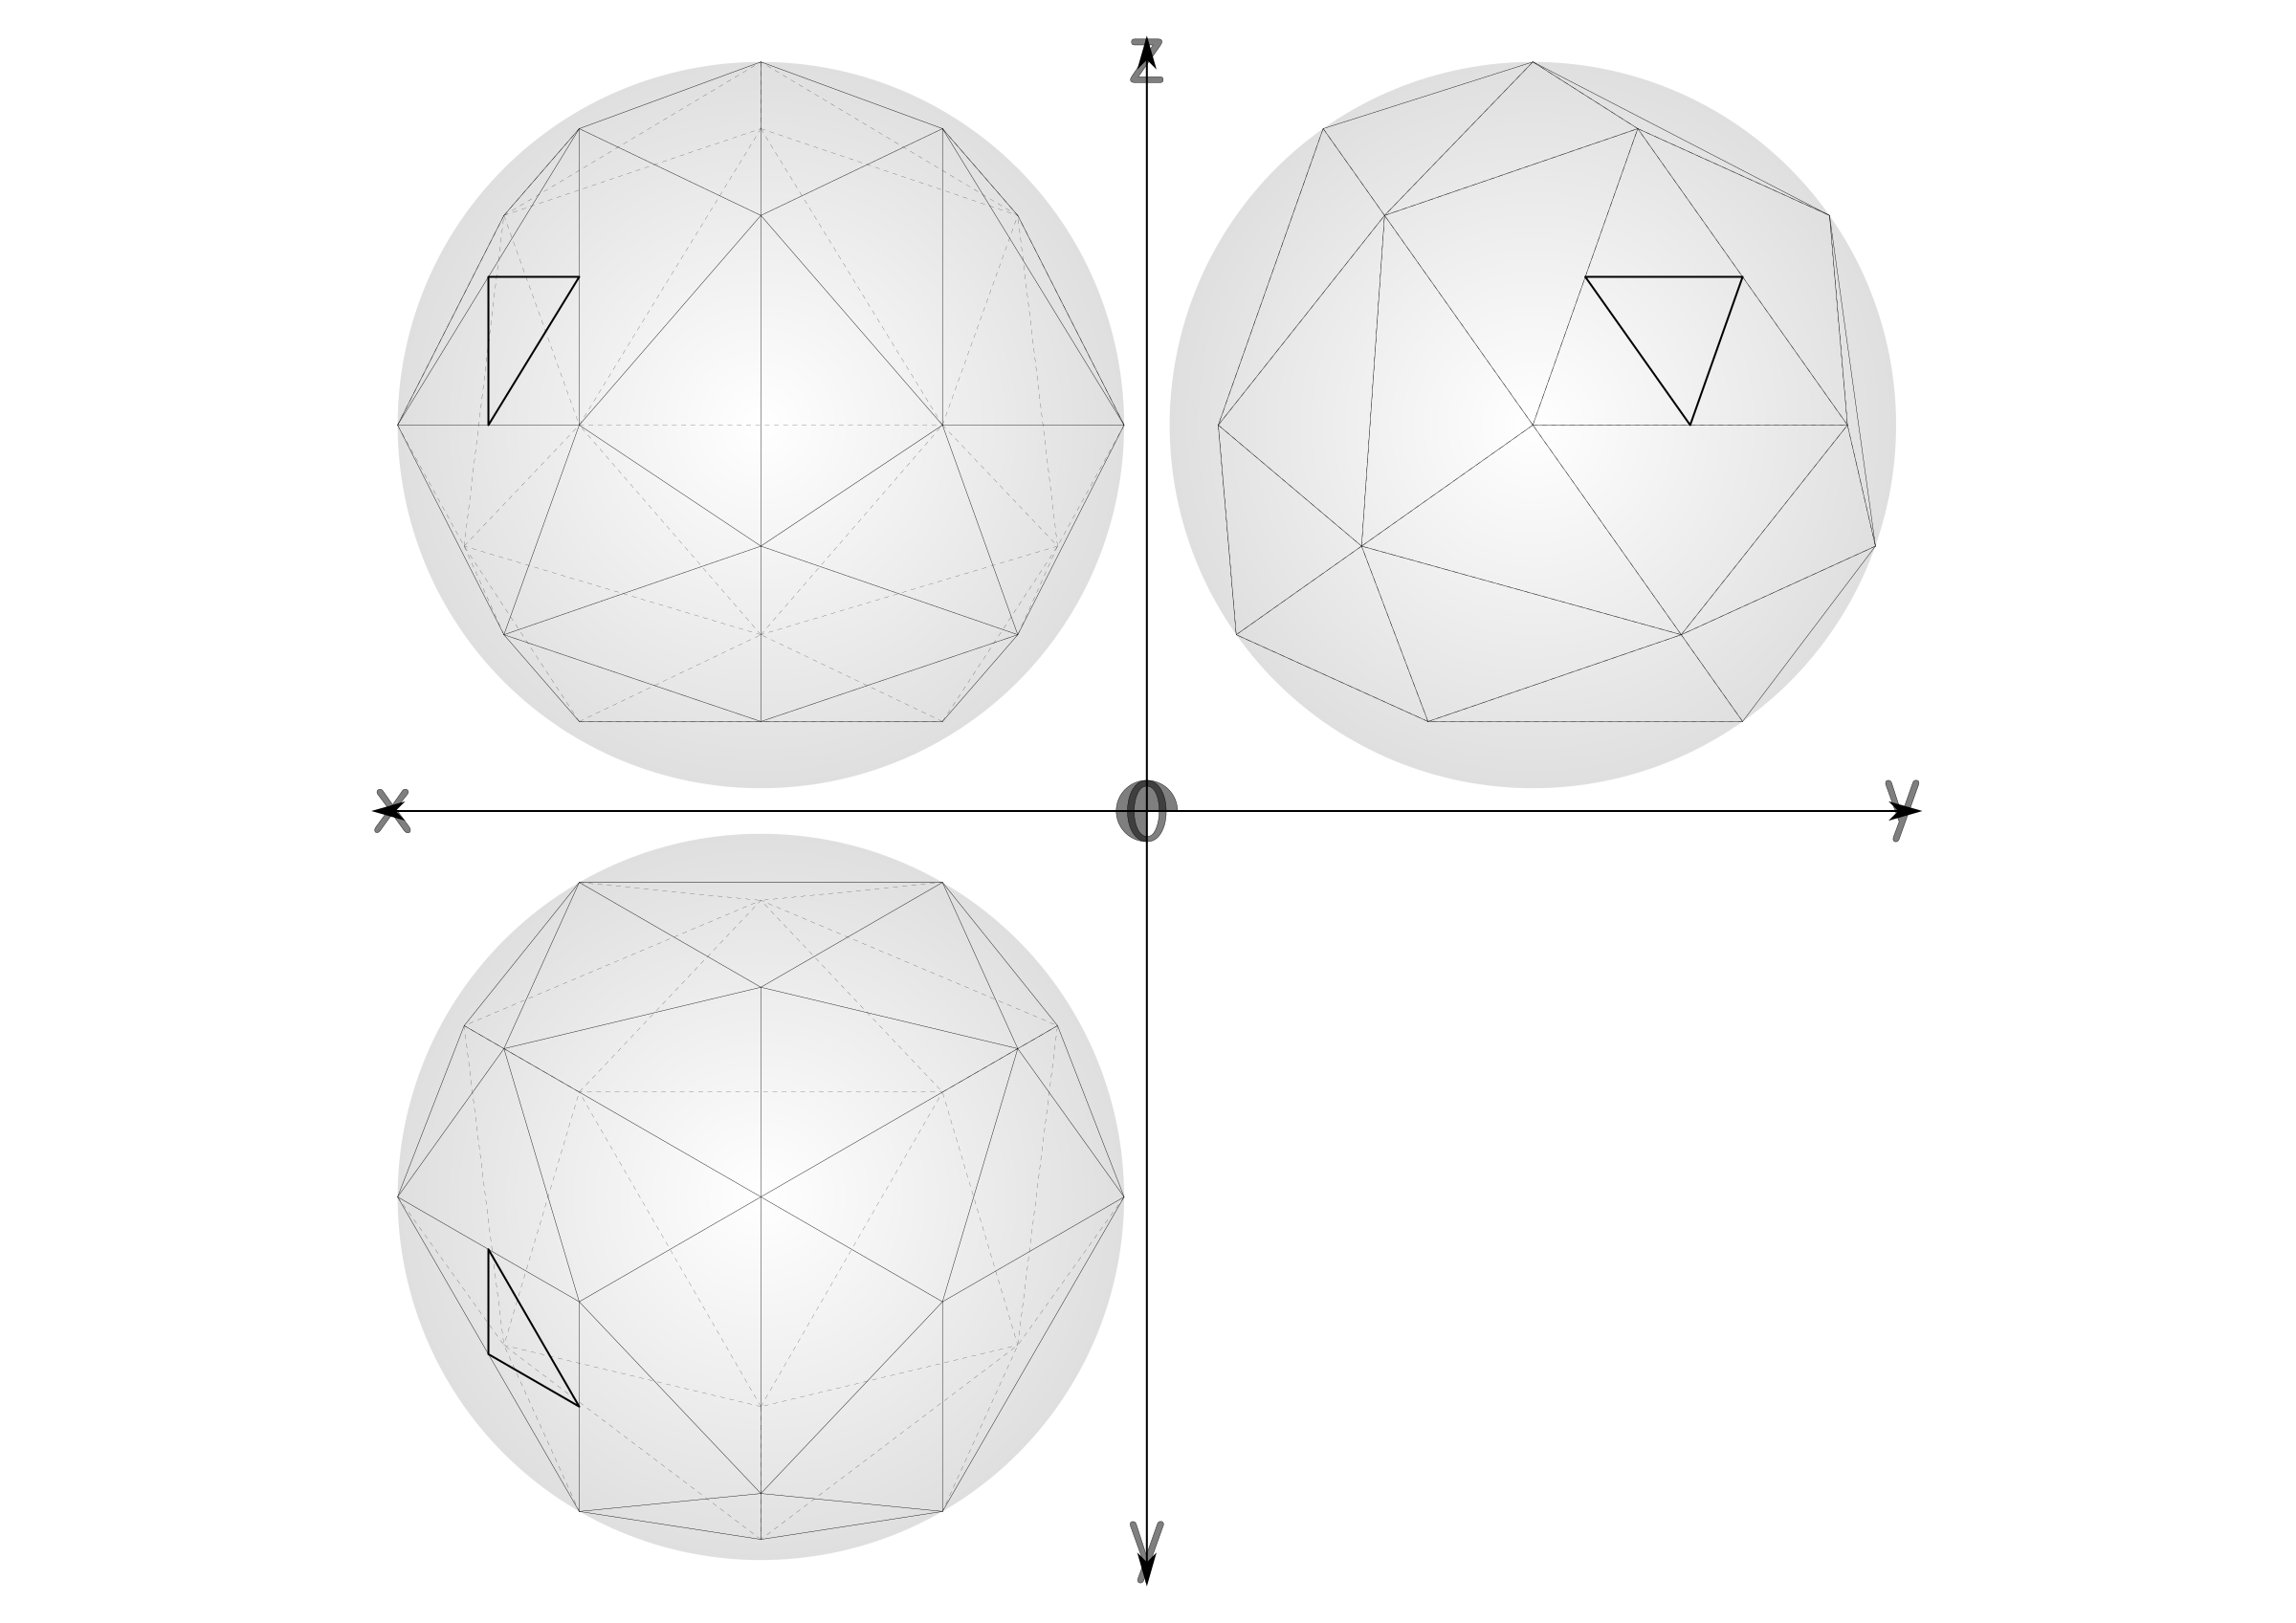 33 construction geodesic spheres recursive from tetrahedron SVG Clip arts